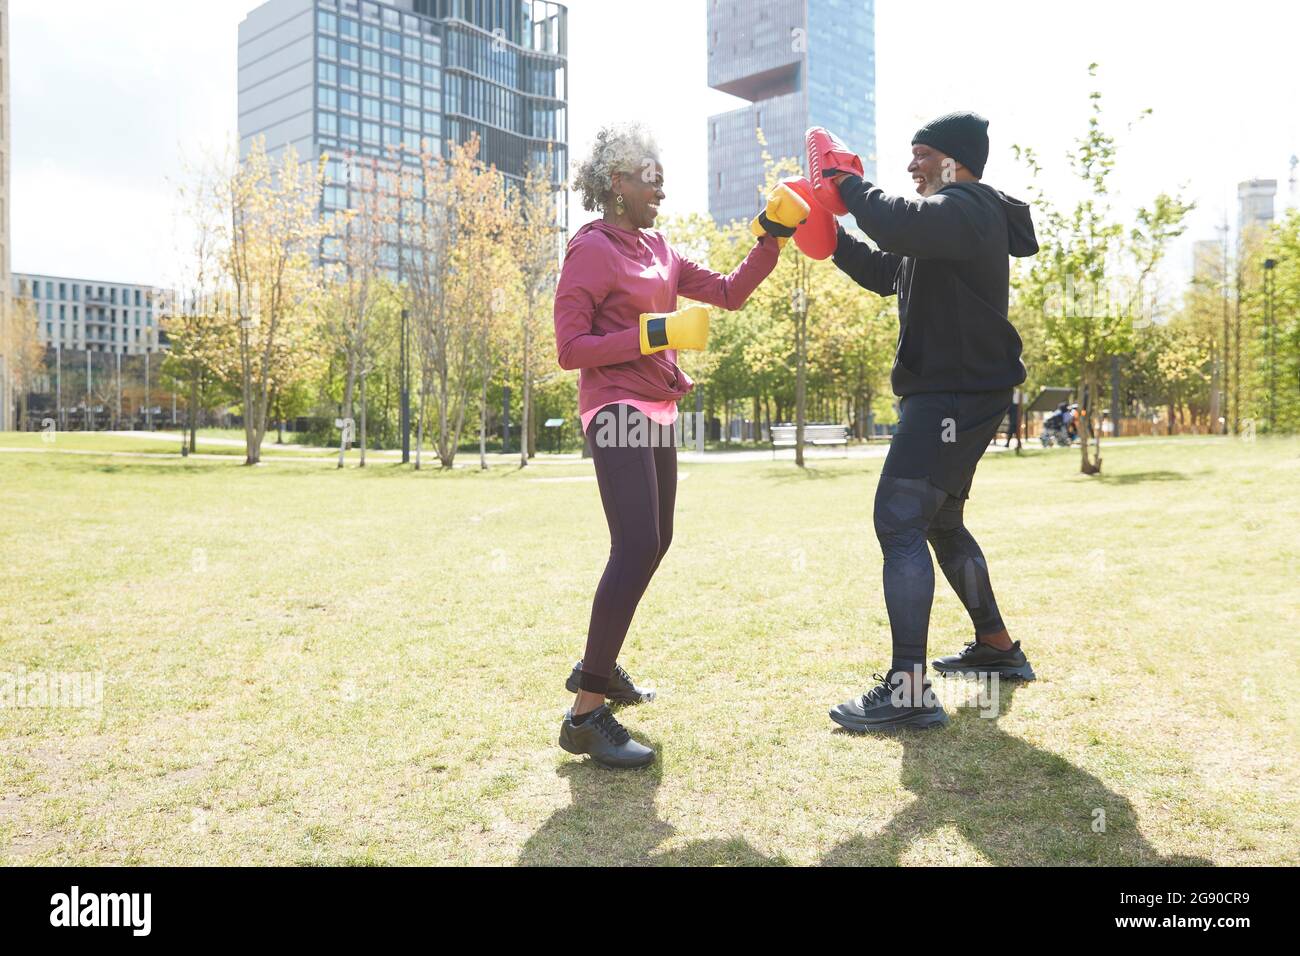 Smiling woman wearing gloves practicing boxing with man at park Stock Photo